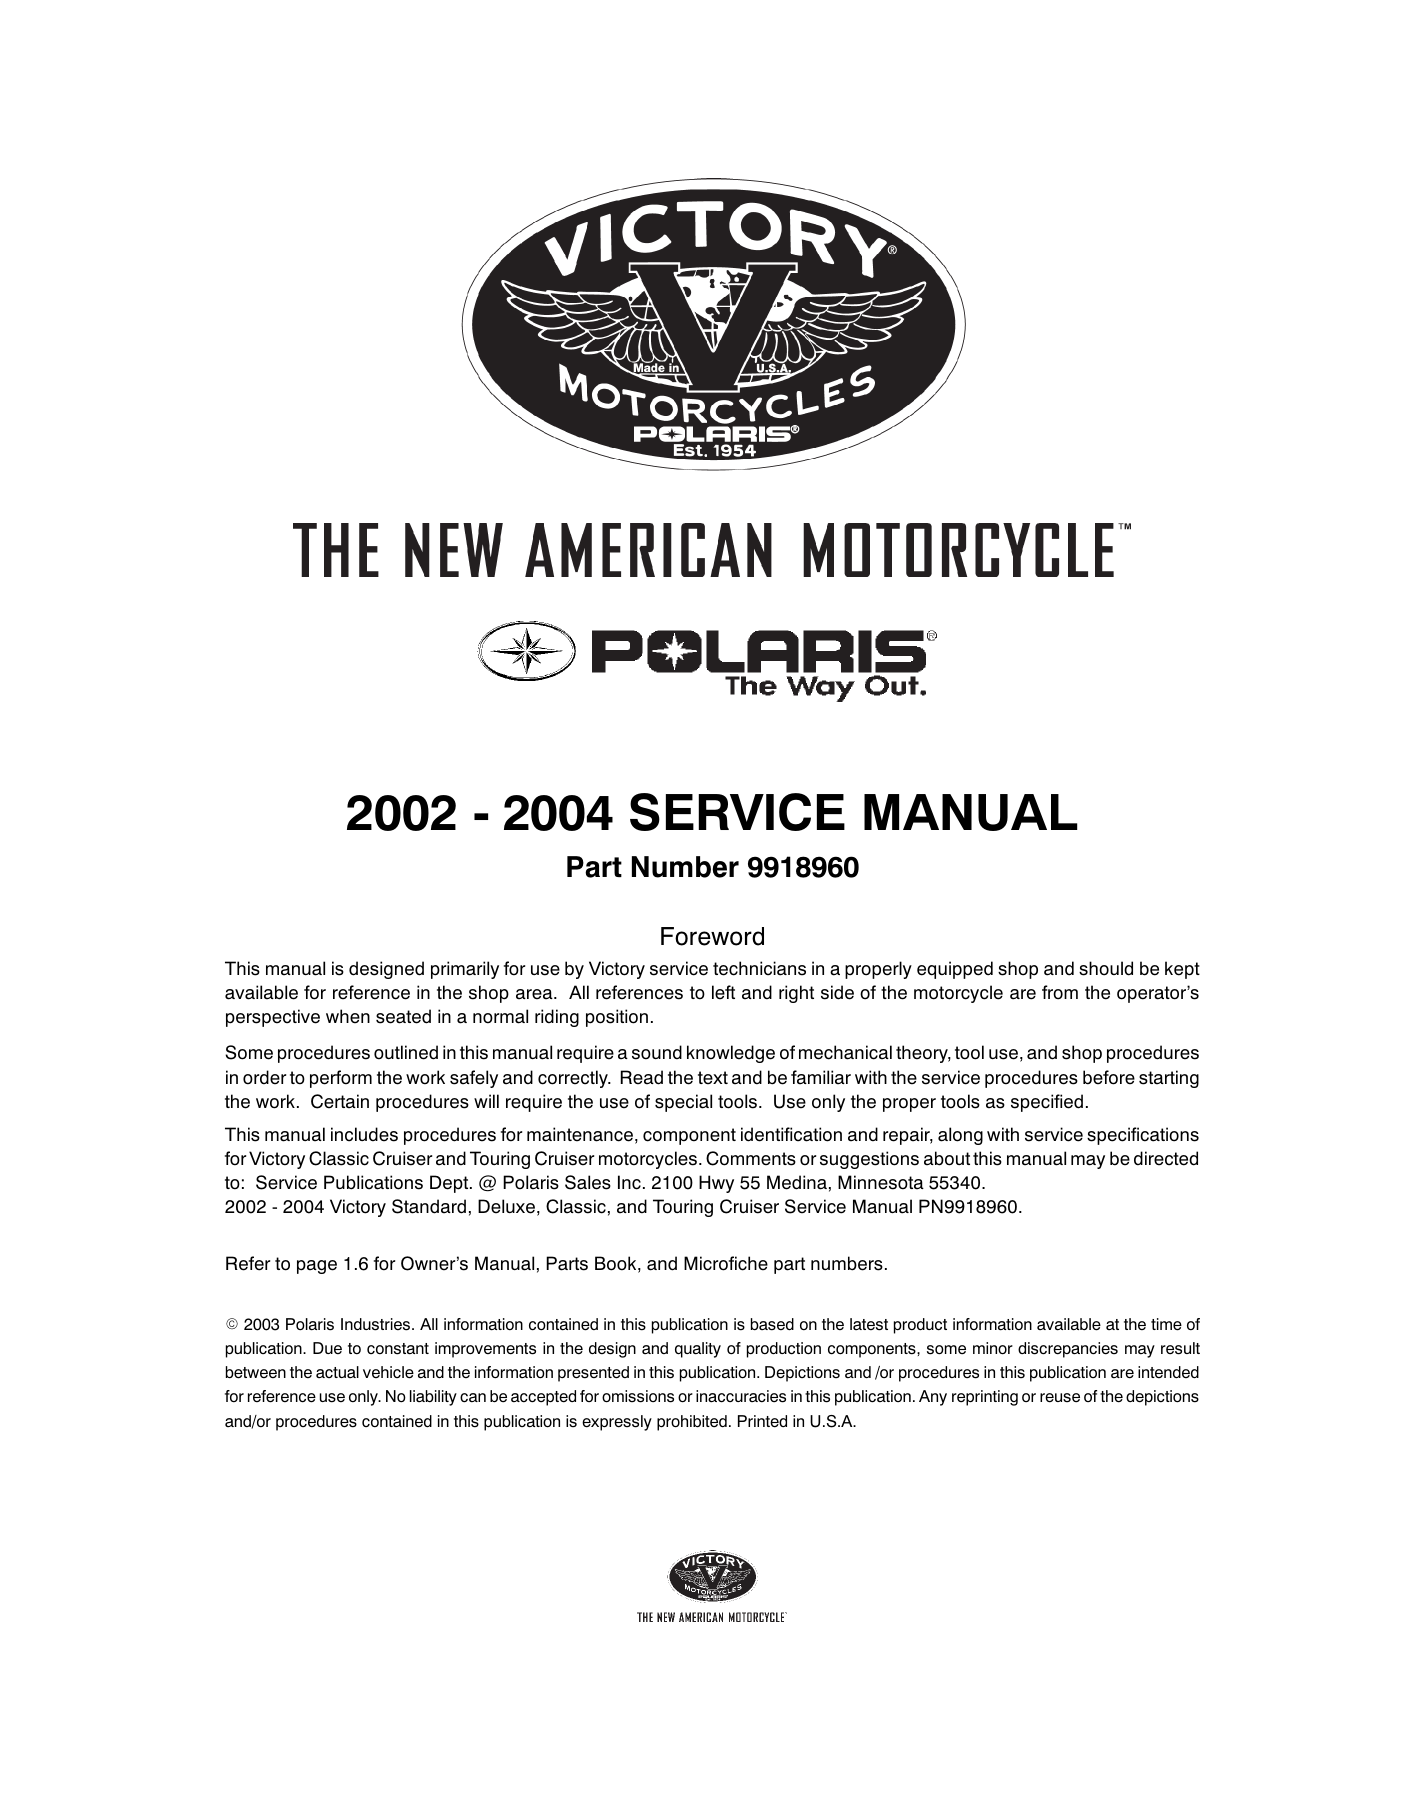 2002-2004 Victory Classic Cruiser, Touring Cruiser service manual Preview image 2